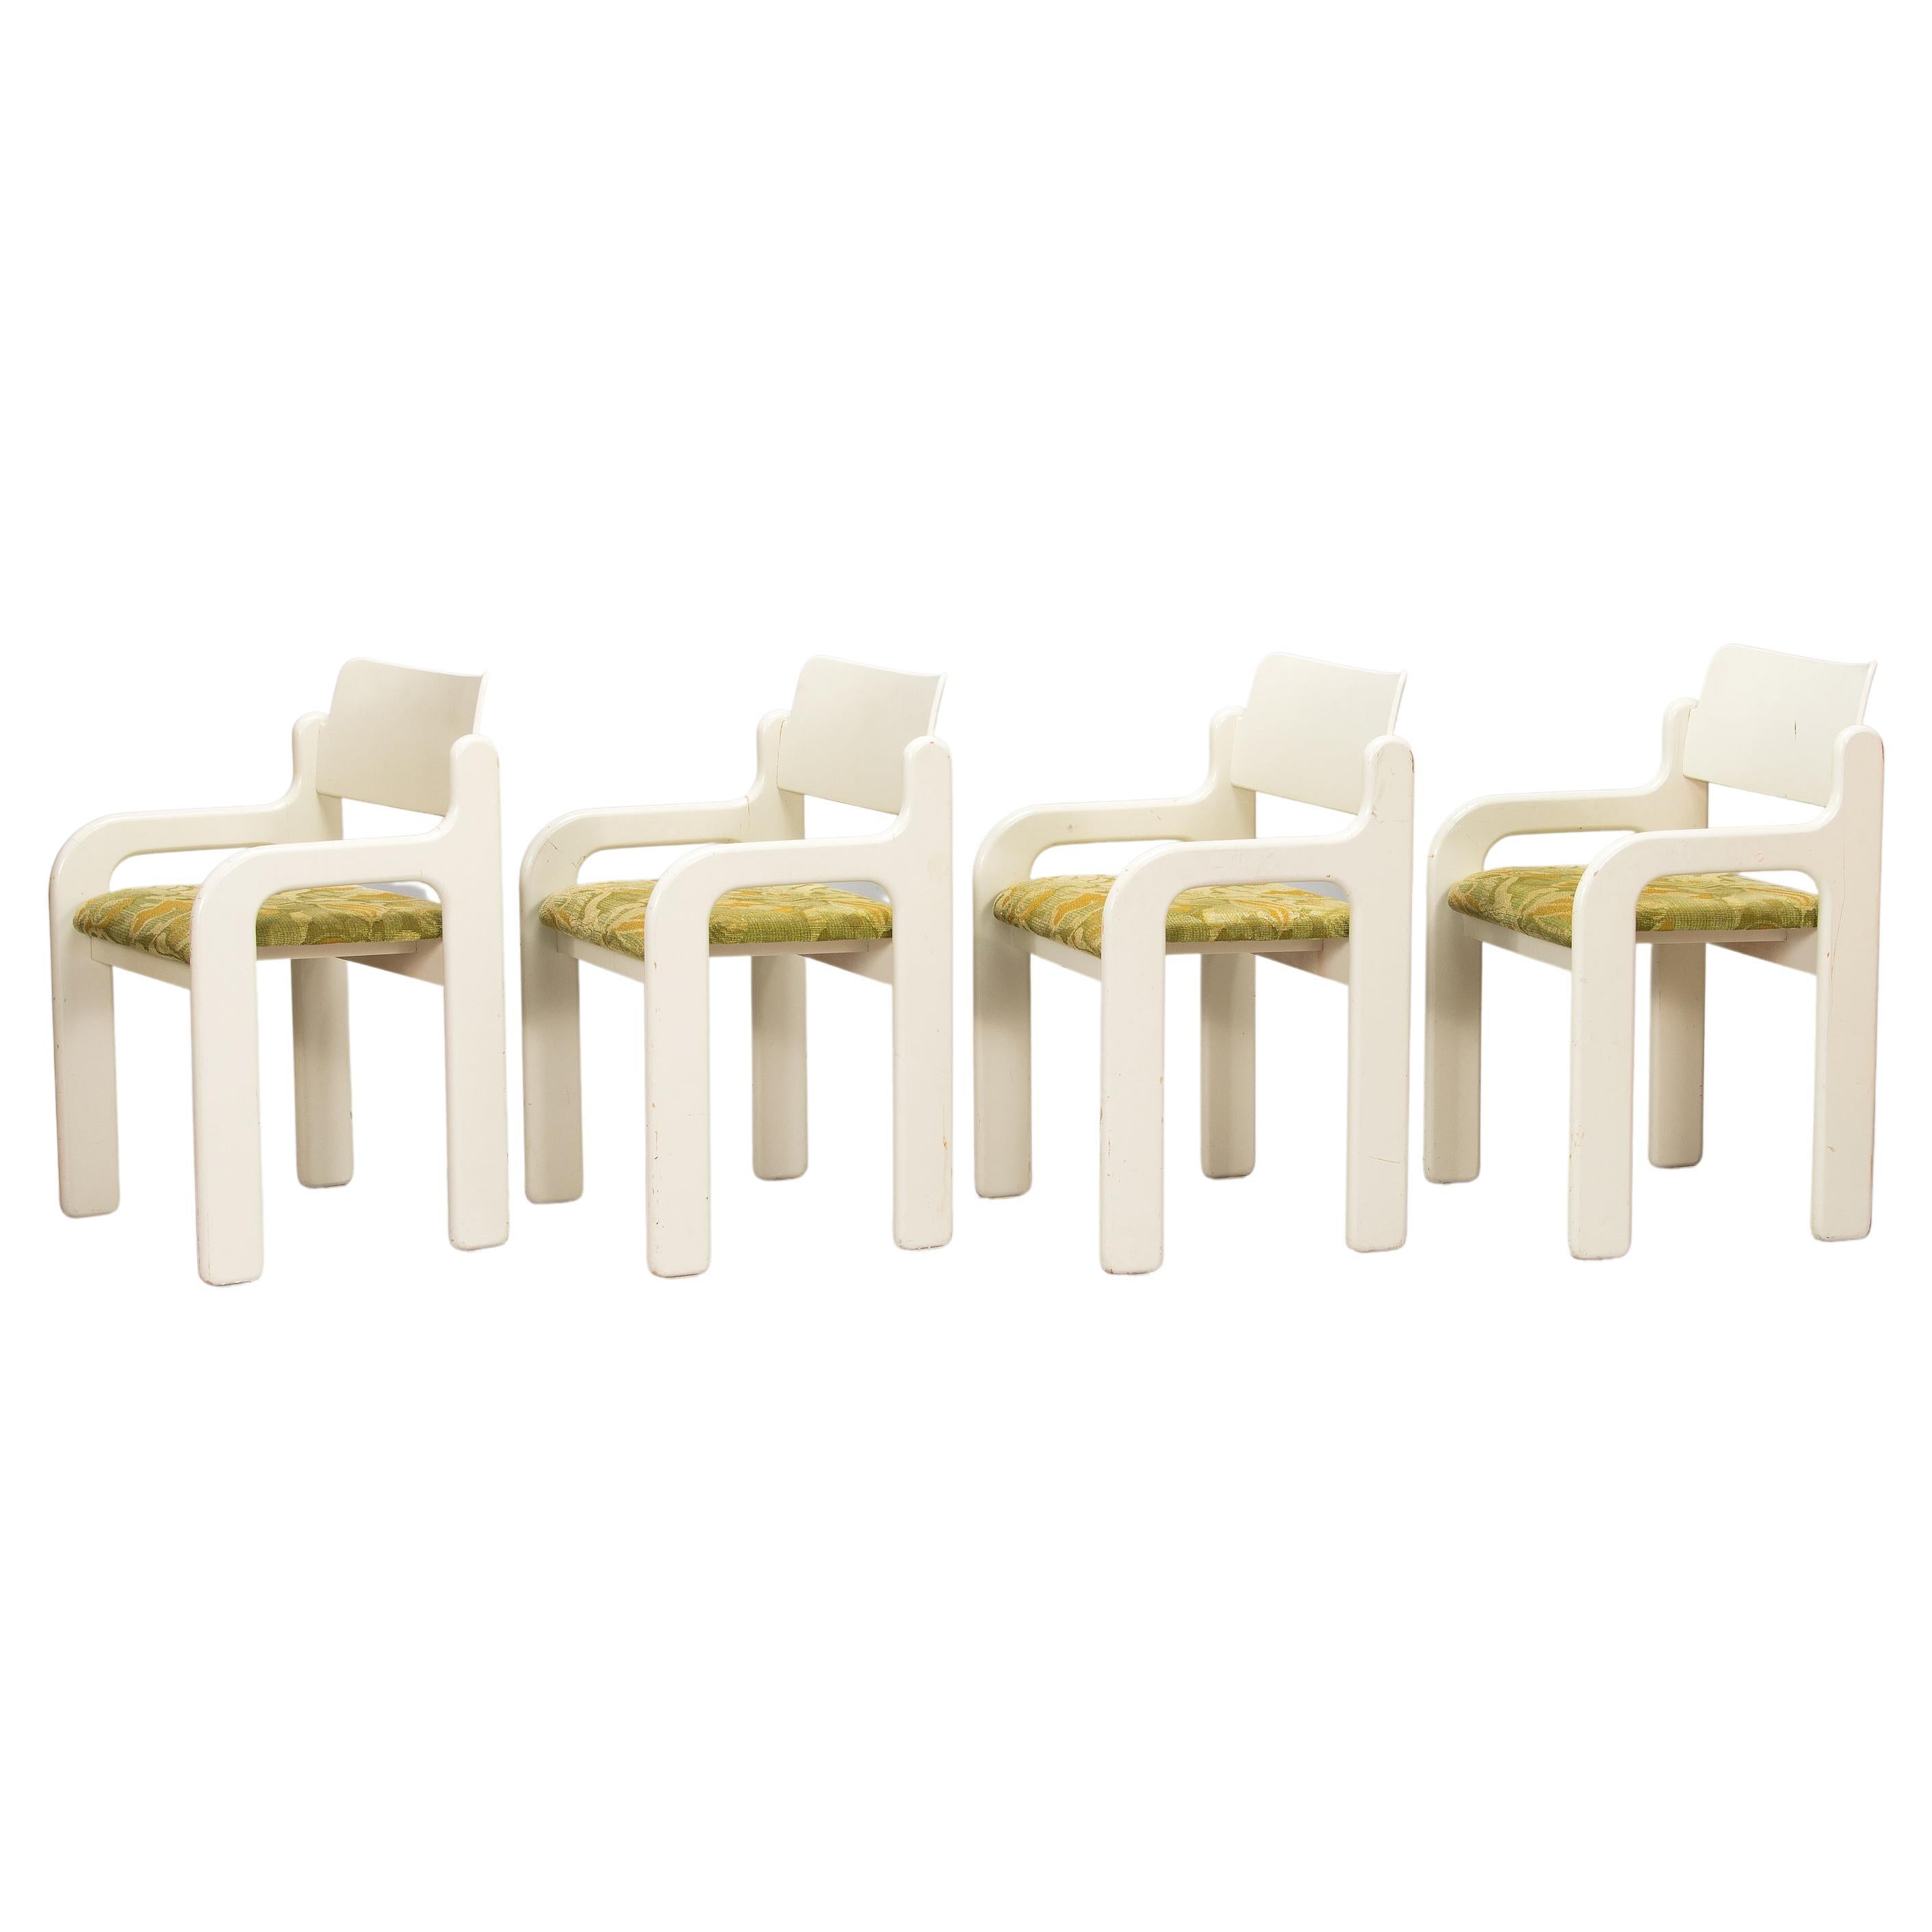 Eero Aarnio 4 Chairs Model Flamingo for Asko Finland Marked, 1970s For Sale